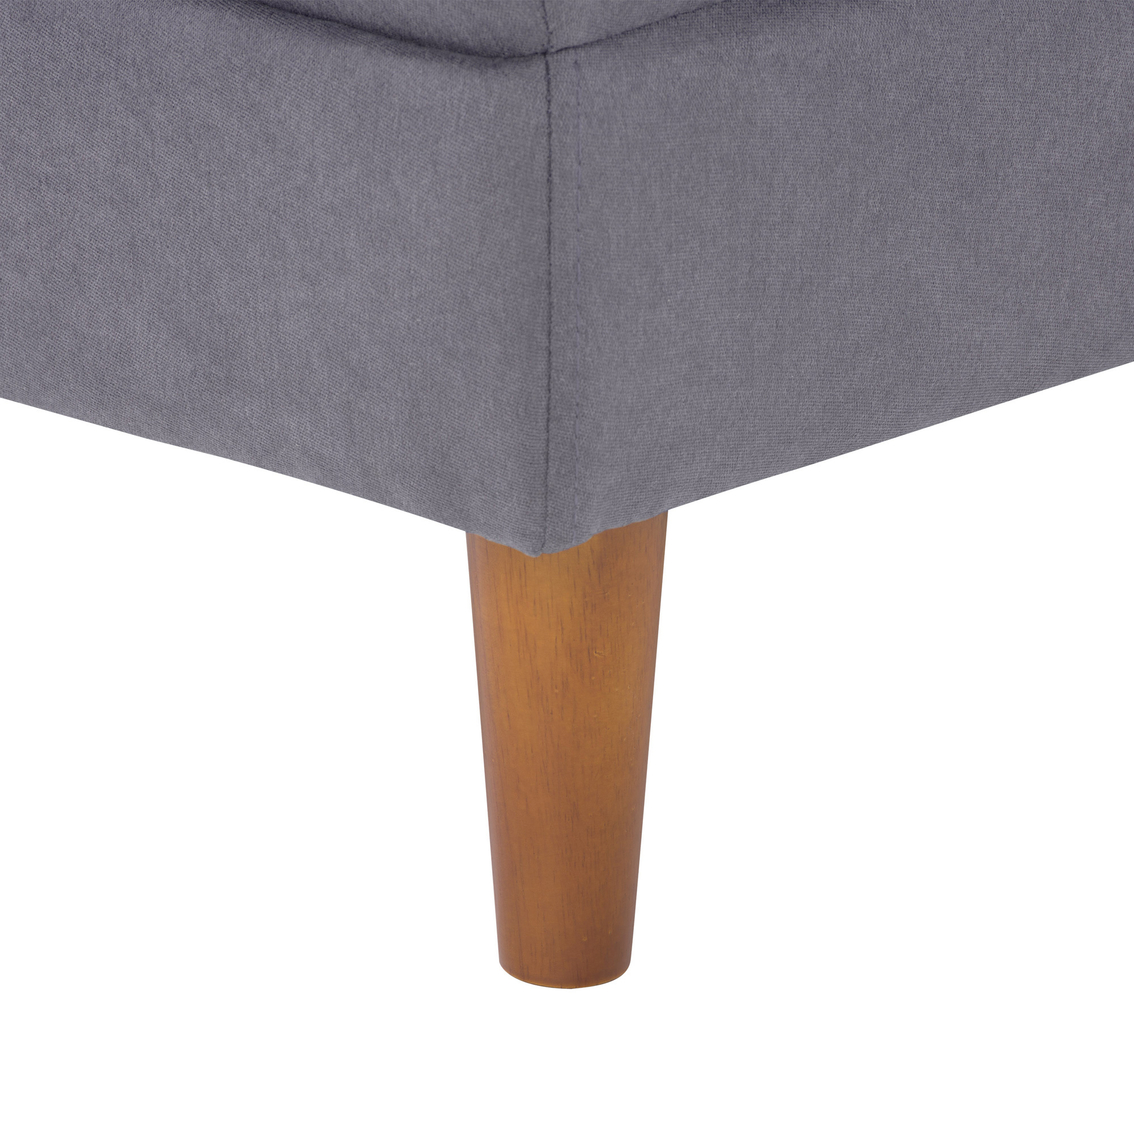 CorLiving Mulberry Fabric Upholstered Modern Ottoman - Image 4 of 6